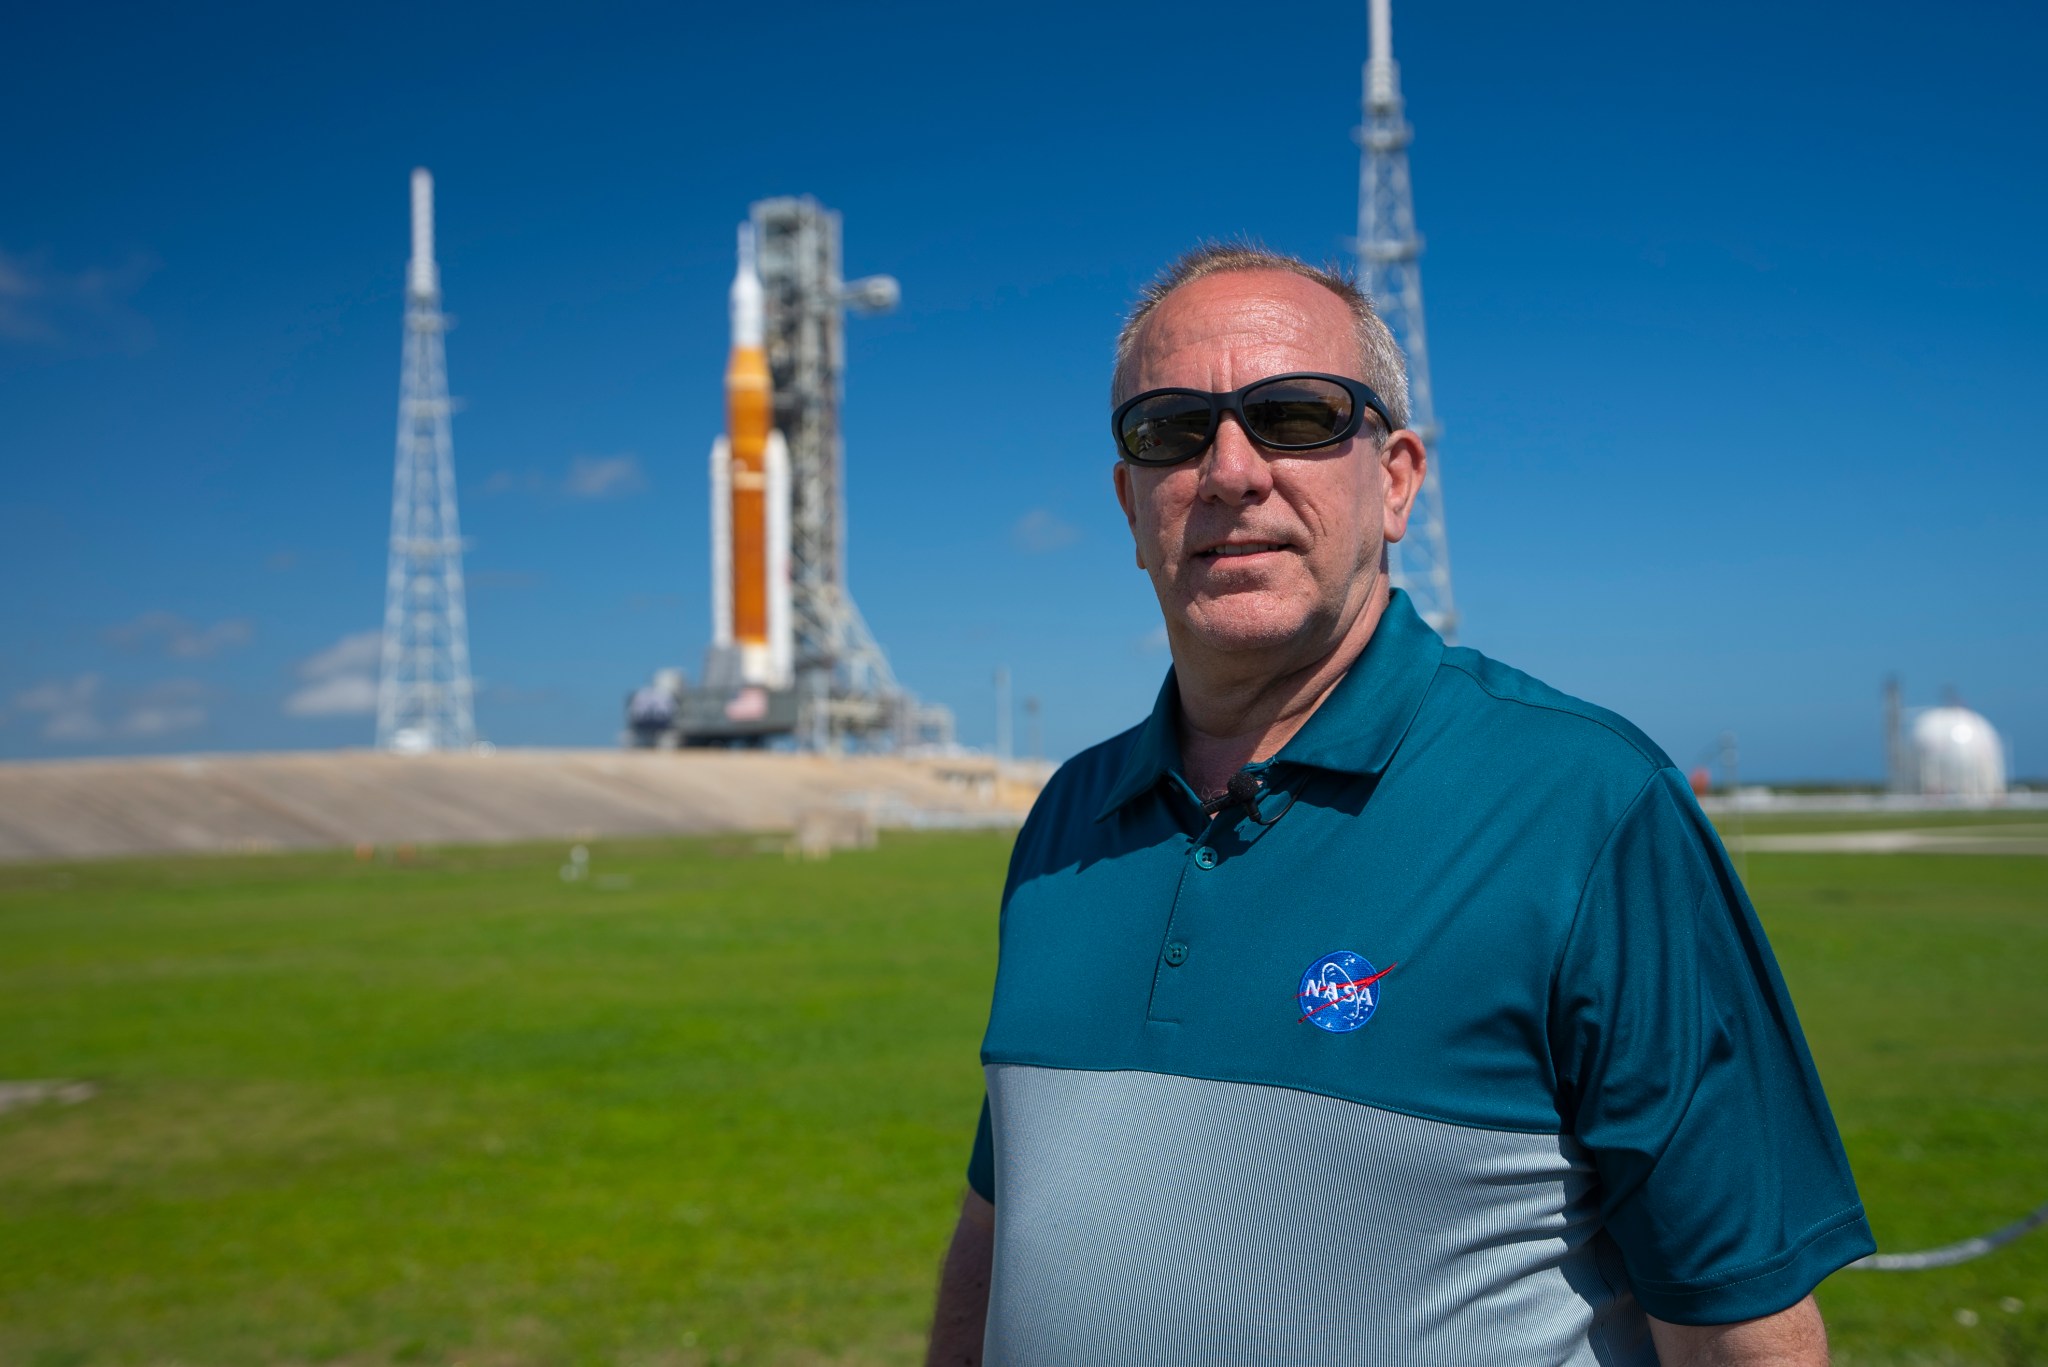 In March 2022, David Beaman, manager of the Space Launch System (SLS) Engineering u0026amp; Integration Office at NASA’s Marshall Space Flight Center in Huntsville, Alabama, views the SLS rocket on the launch pad when it rolled out the first time.